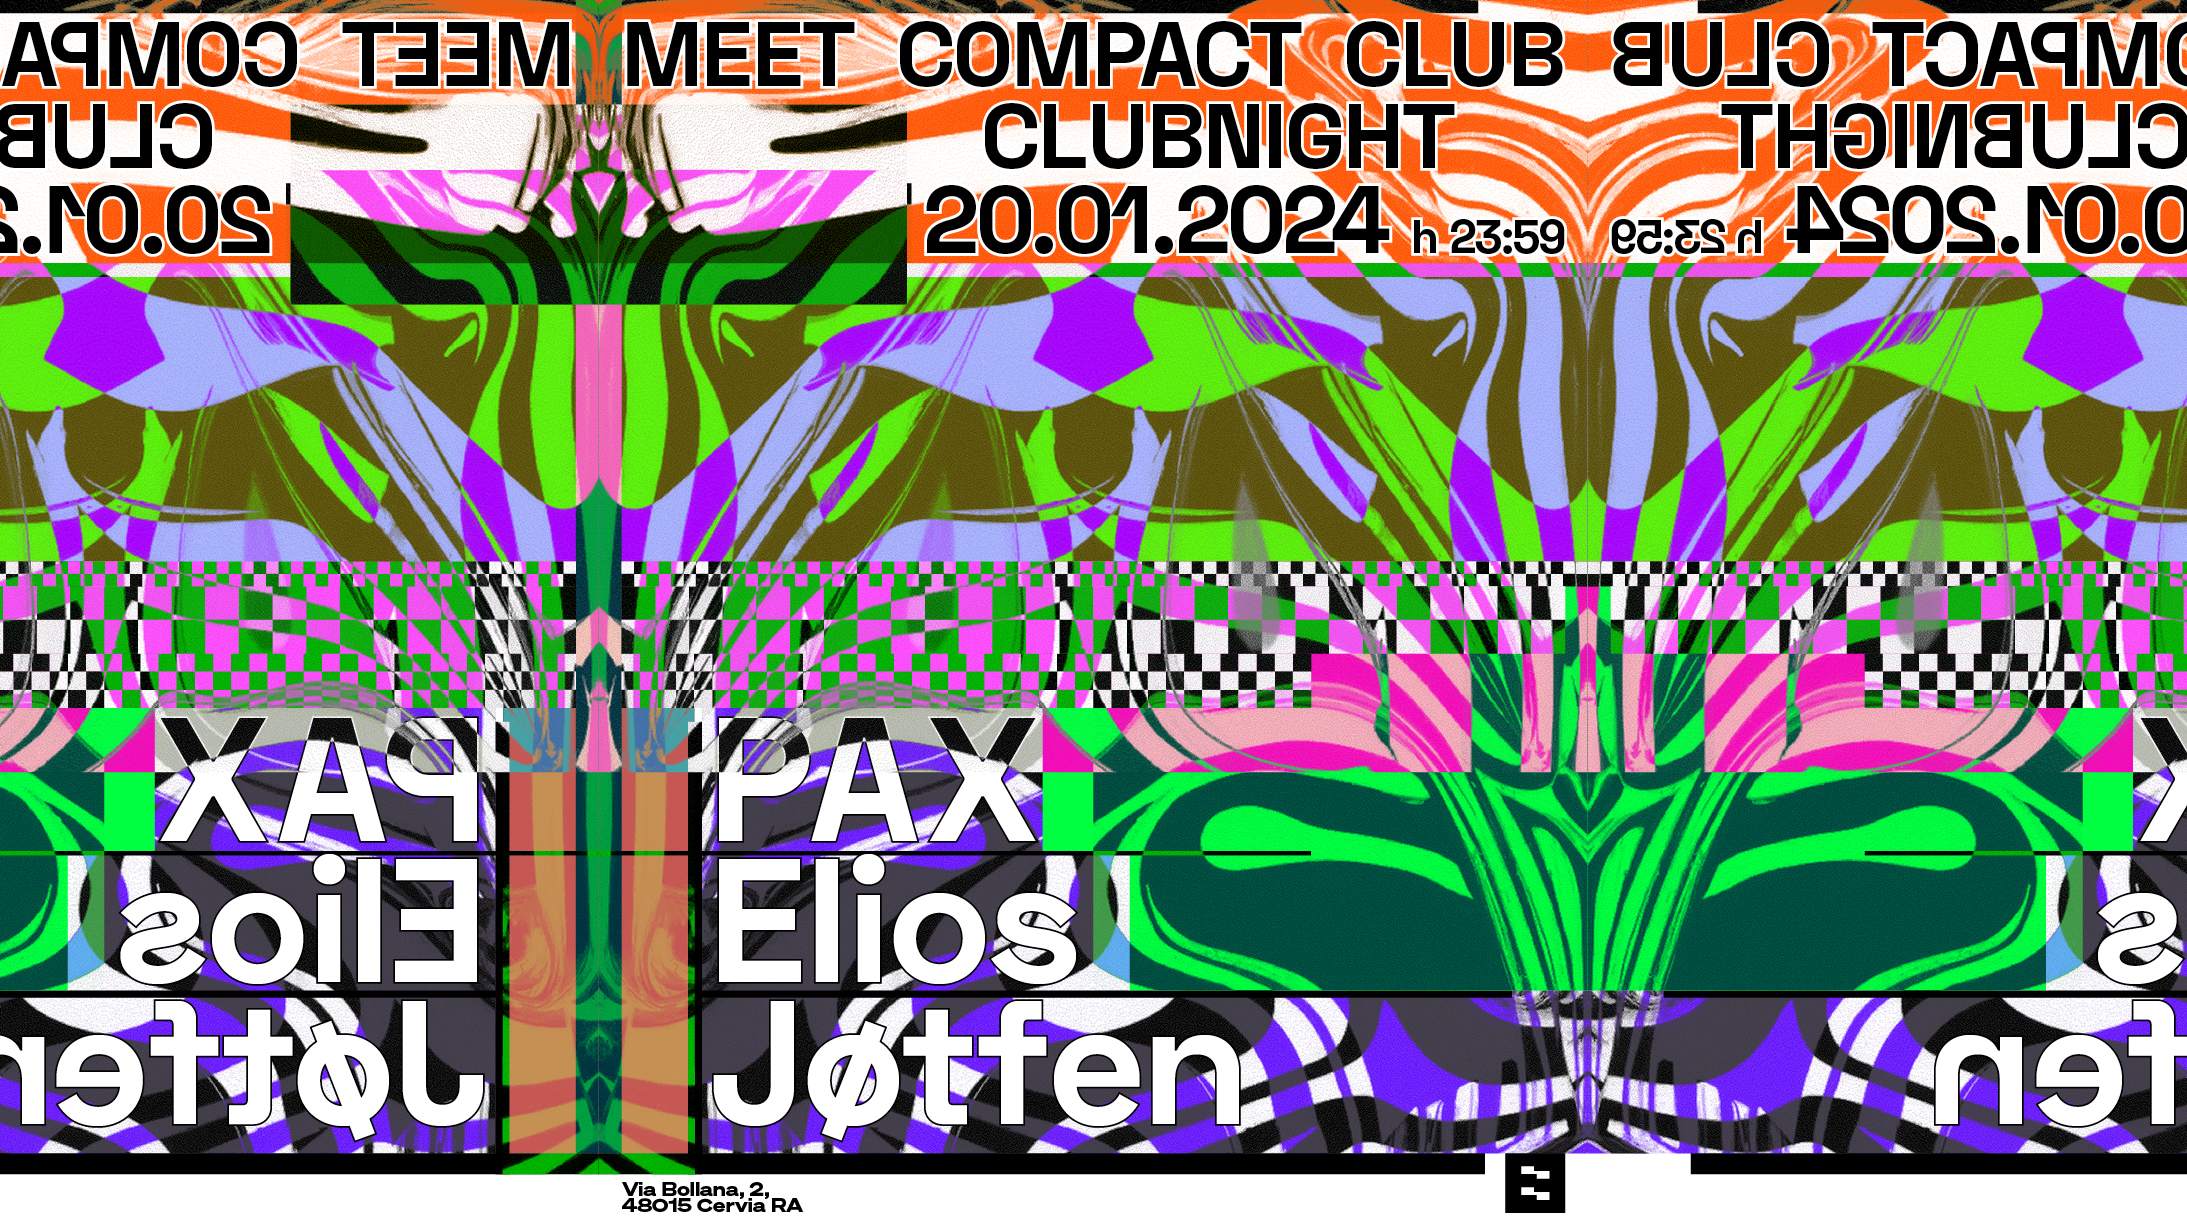 Meet Compact Club with PAX - フライヤー表